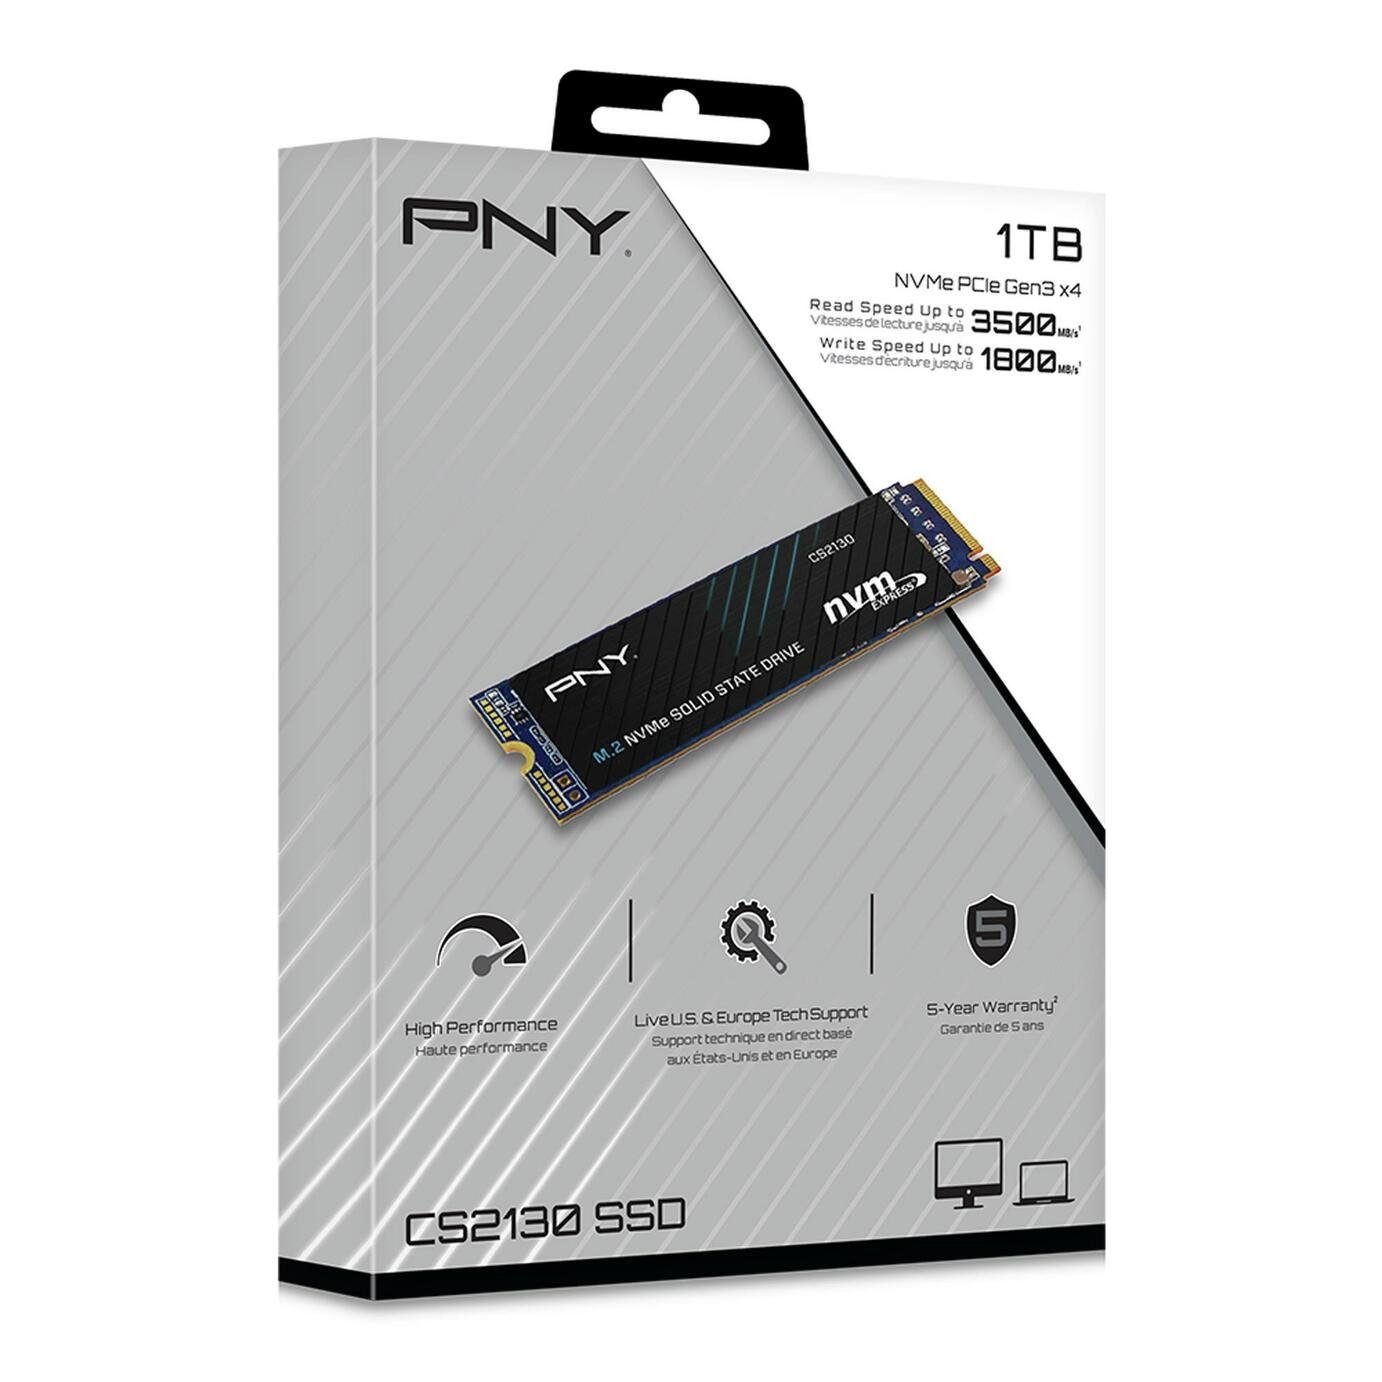 PNY CS2130 M.2 1TB Solid State SSD Interal Hard Drive Review